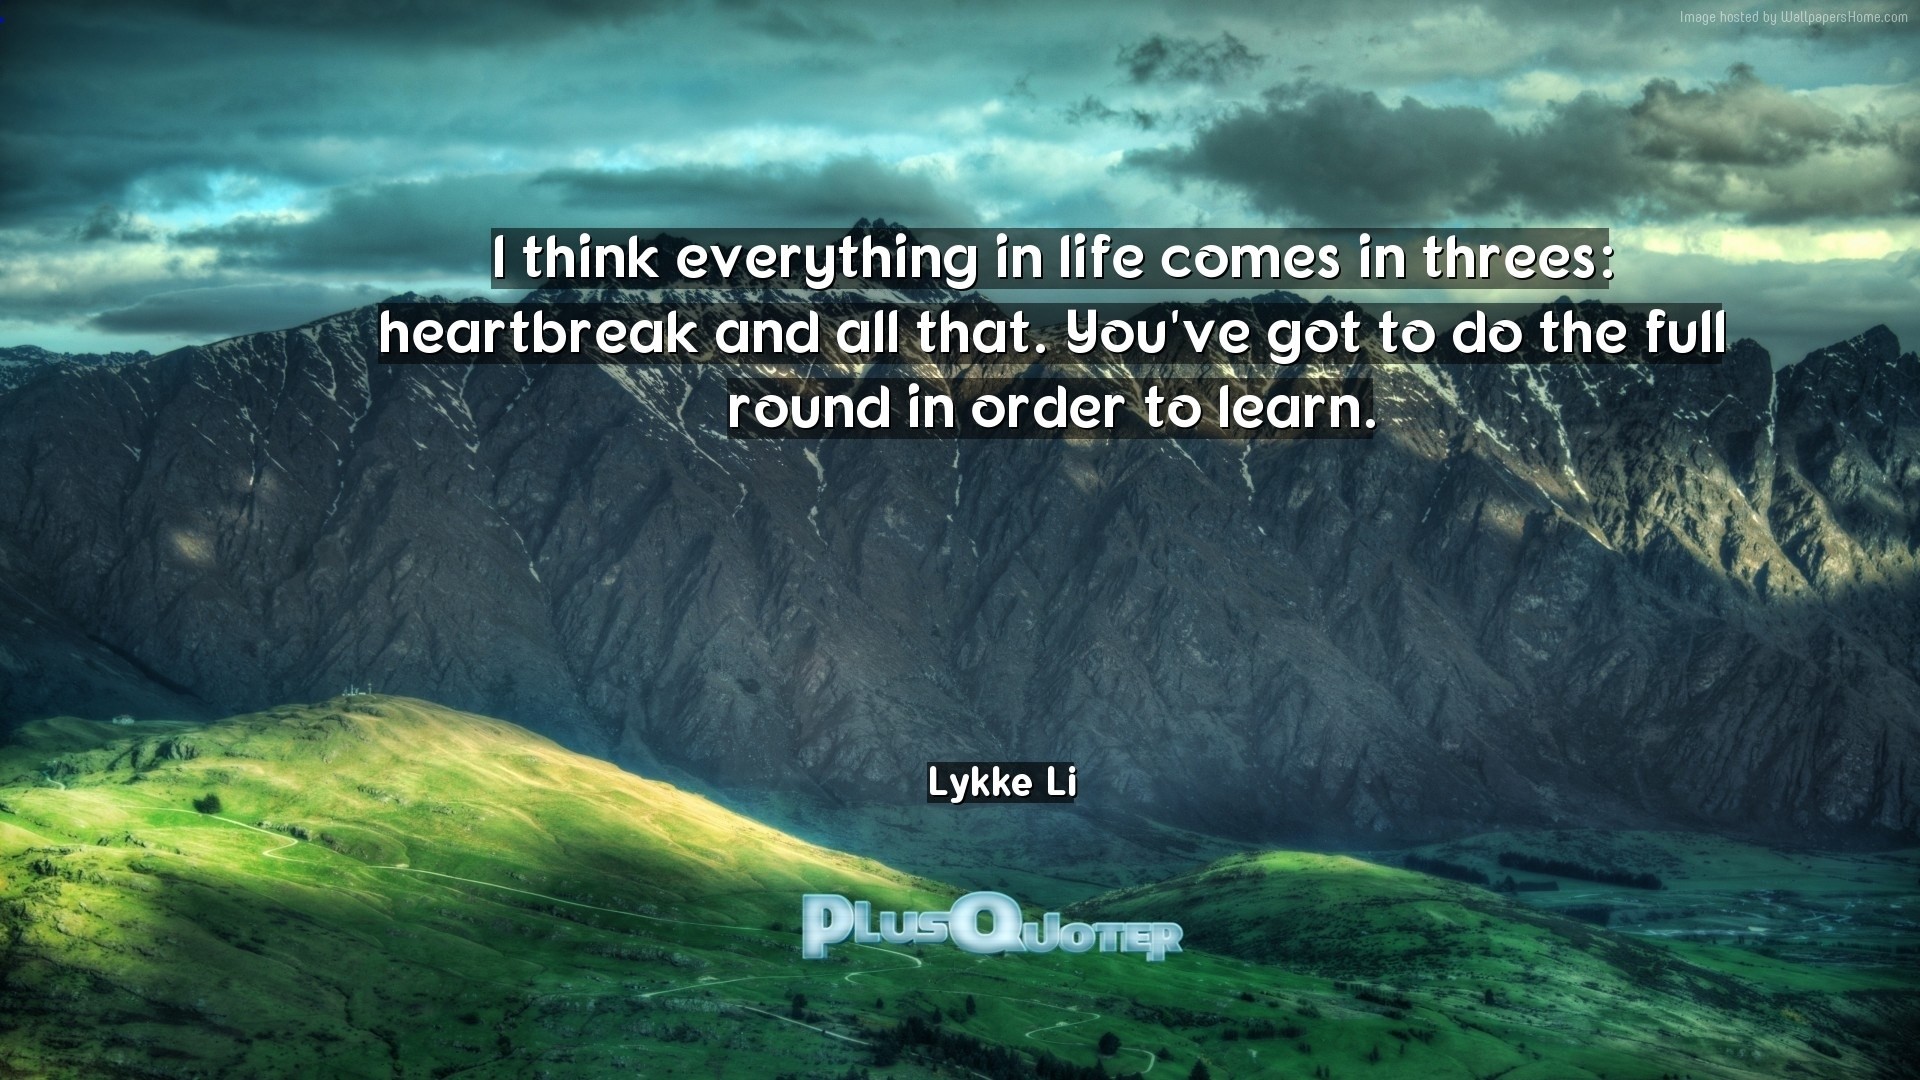 1920x1080 Download Wallpaper with inspirational Quotes- "I think everything in life  comes in threes: